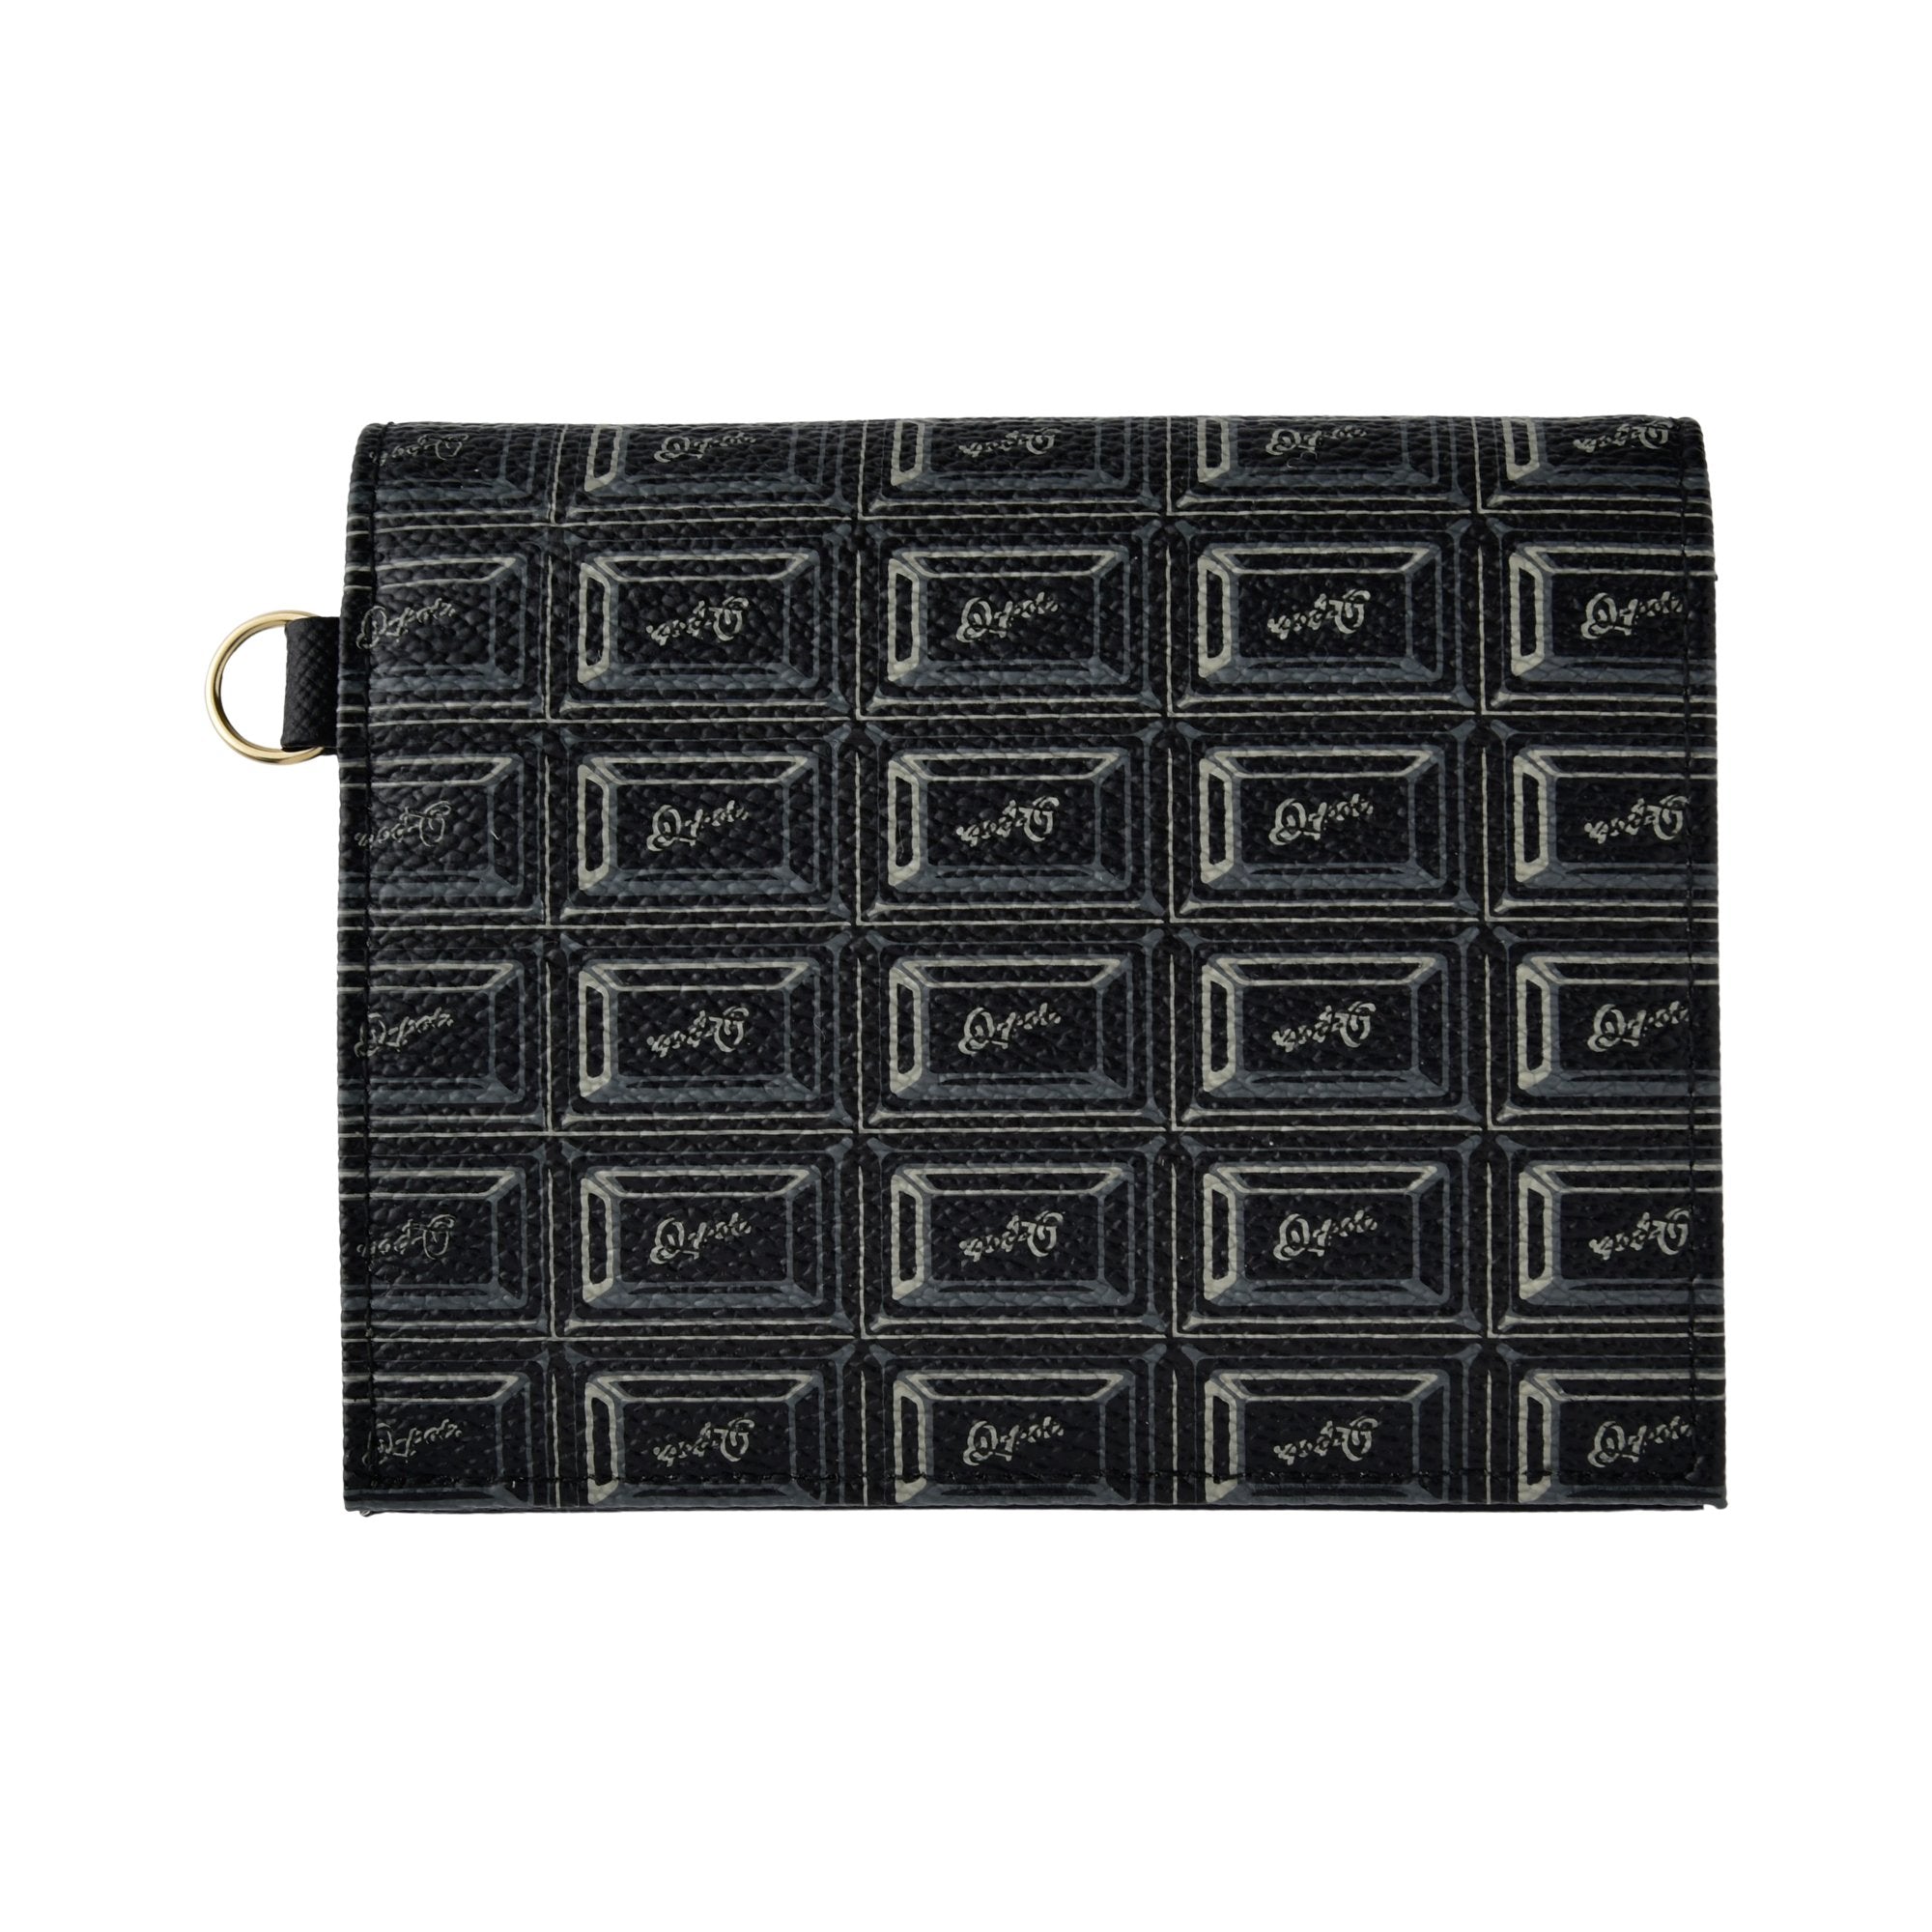 Black Chocolate Leather Flap Short Wallet【Japan Jewelry】